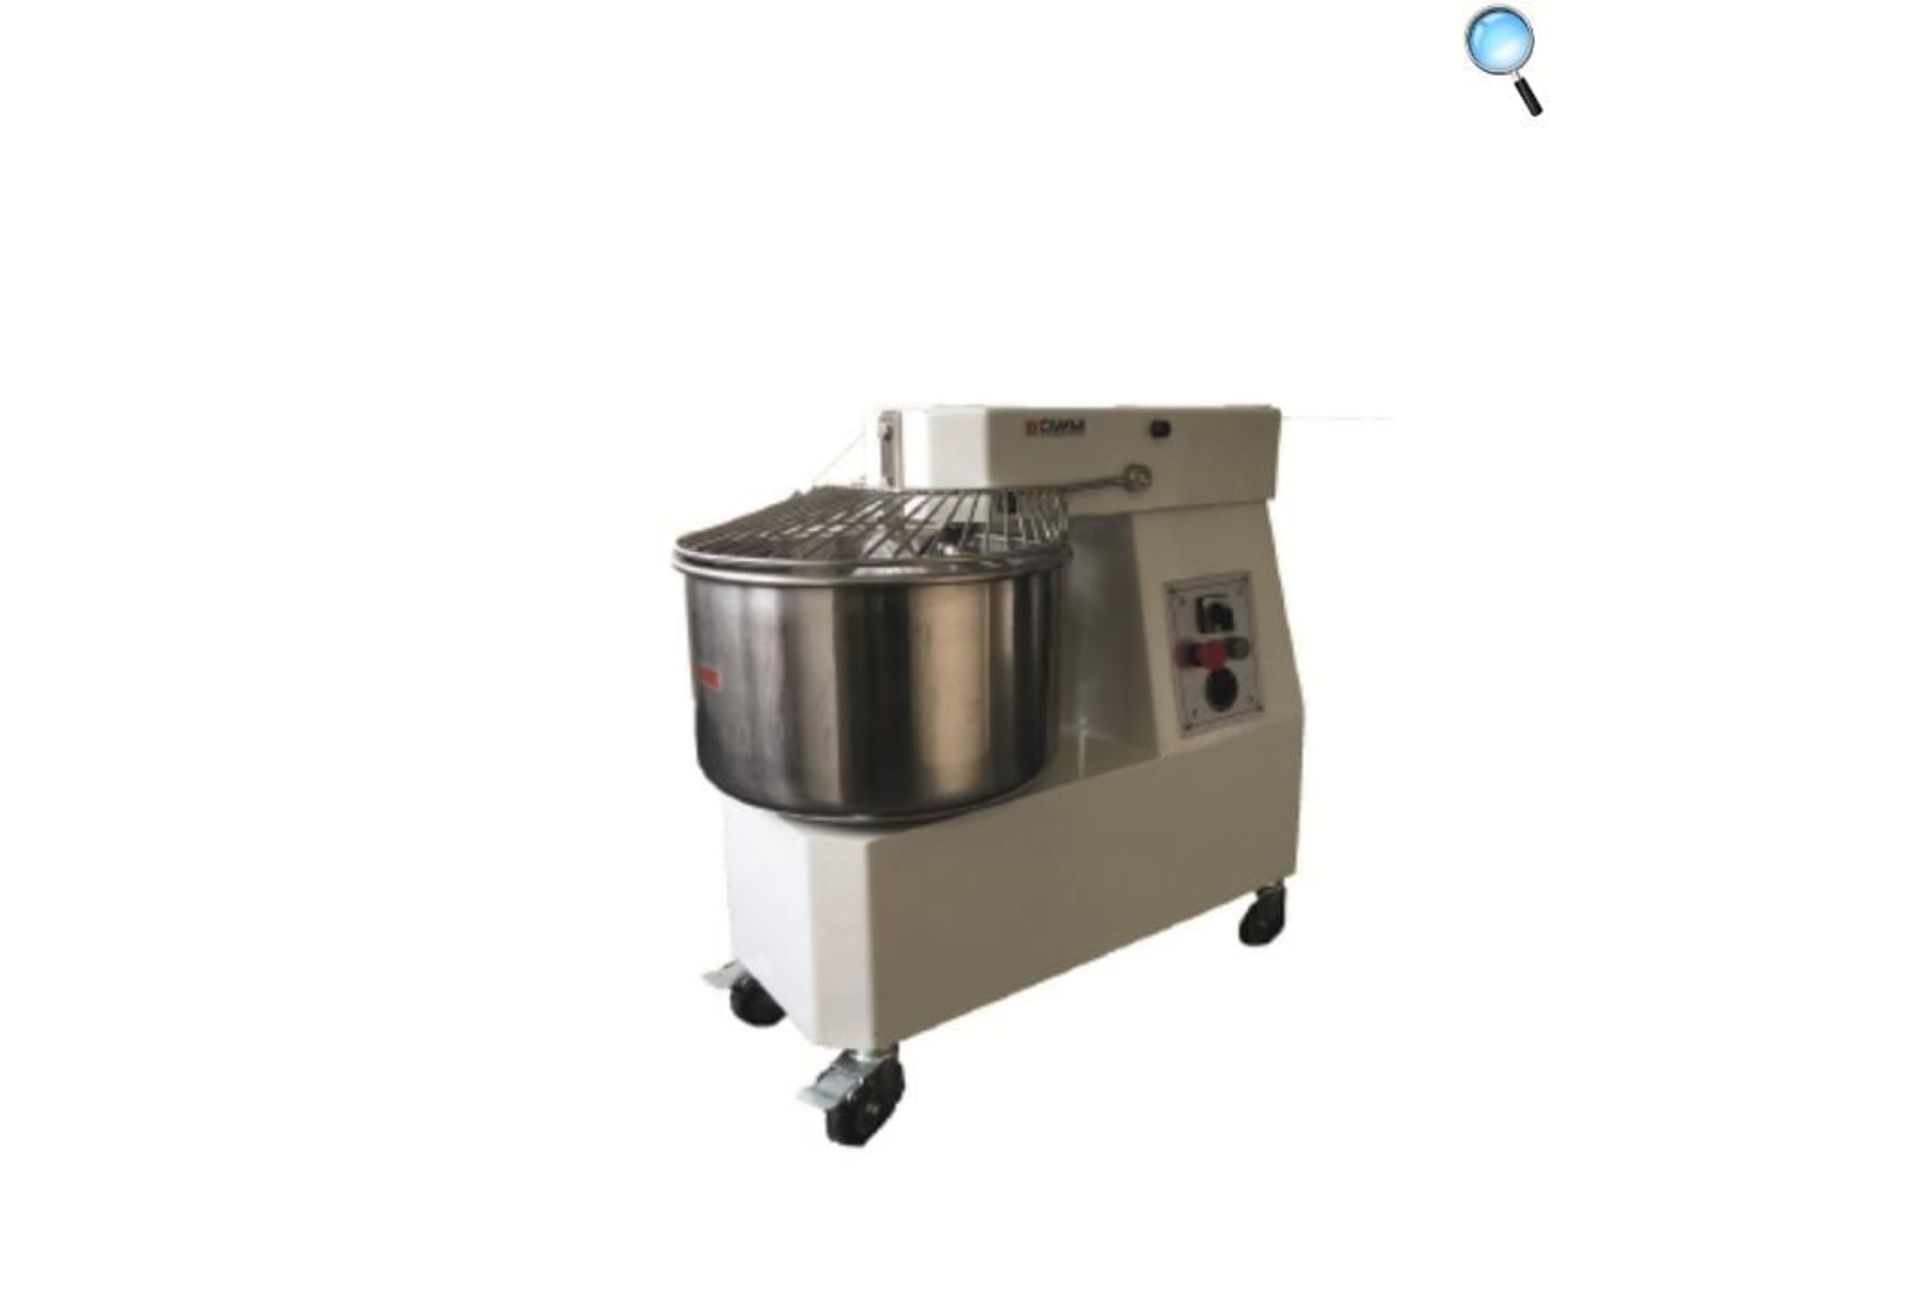 BRAND NEW 30L DOUGH MIXER SPRIAL - ITALIAN MADE - STILL IN BOX - 13 AMP UK PLUG - Image 3 of 6